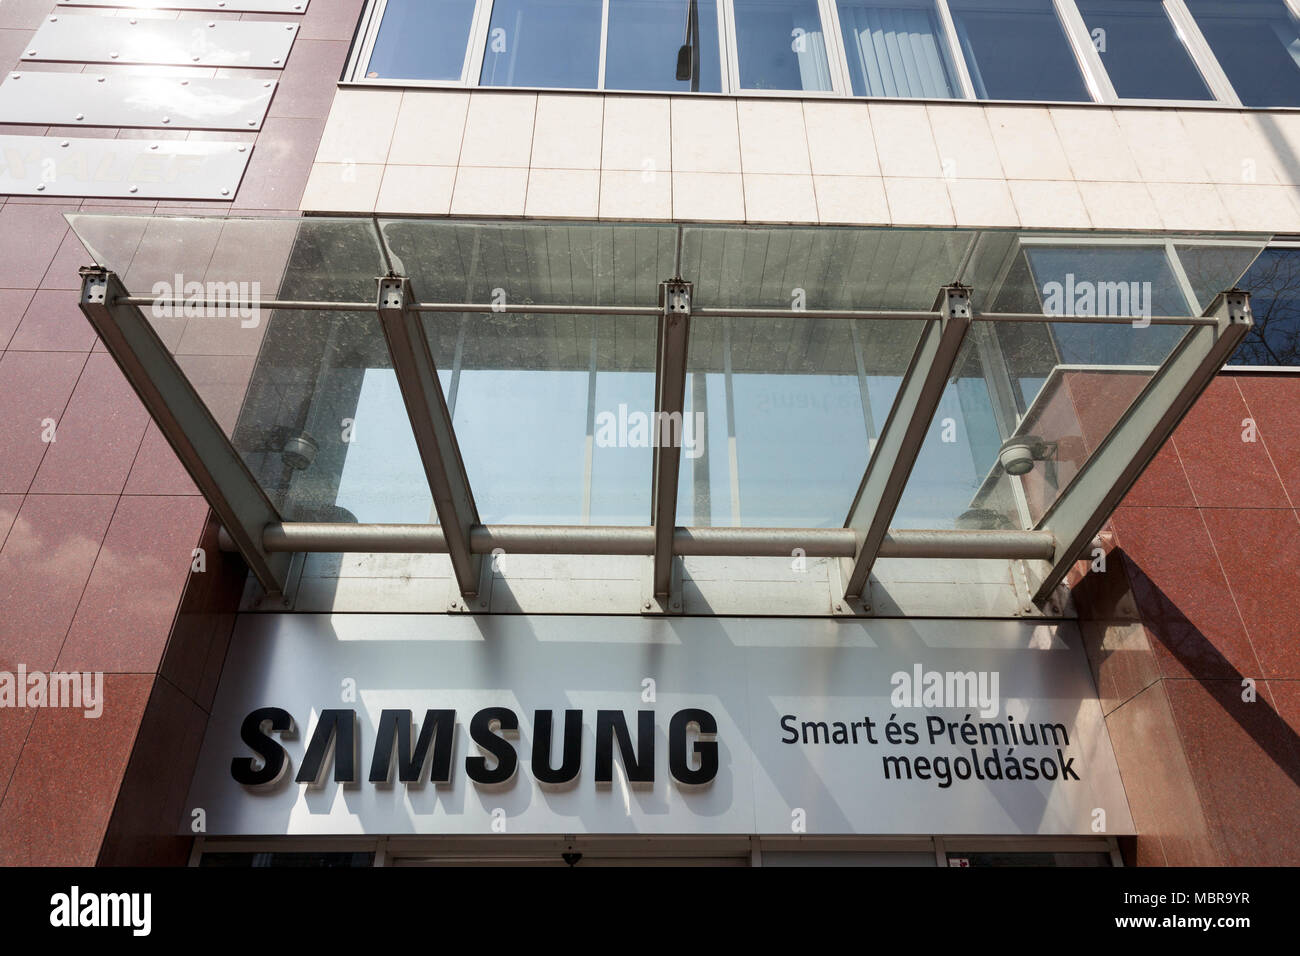 BUDAPEST, HUNGARY - APRIL 6, 2018: Samsung logo on their main office for Hungary. Samsung is one of the main It technologies conglomerates in the worl Stock Photo